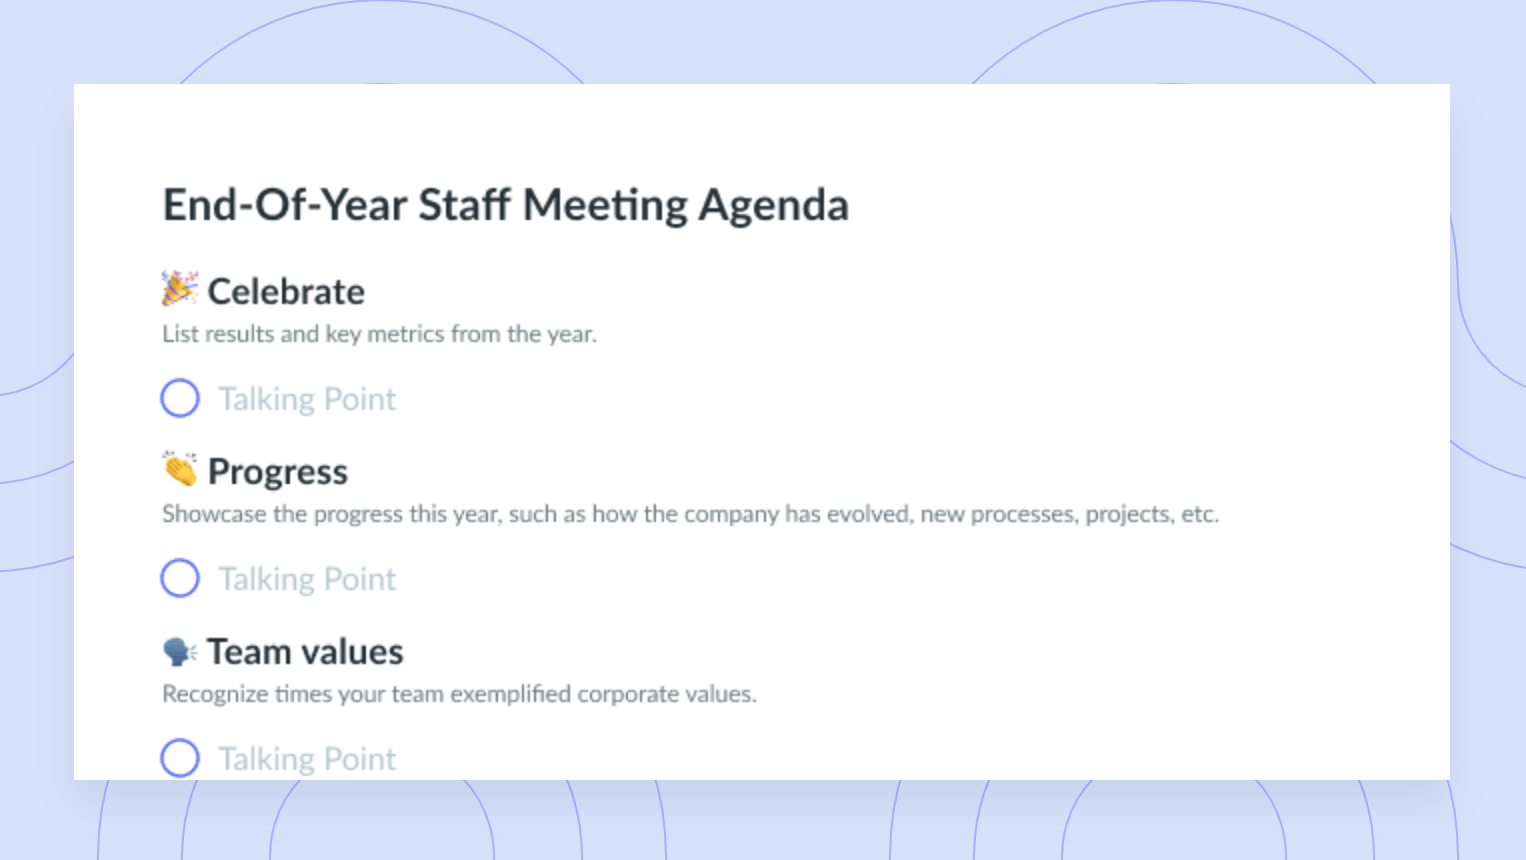 End-Of-Year Staff Meeting Agenda Template